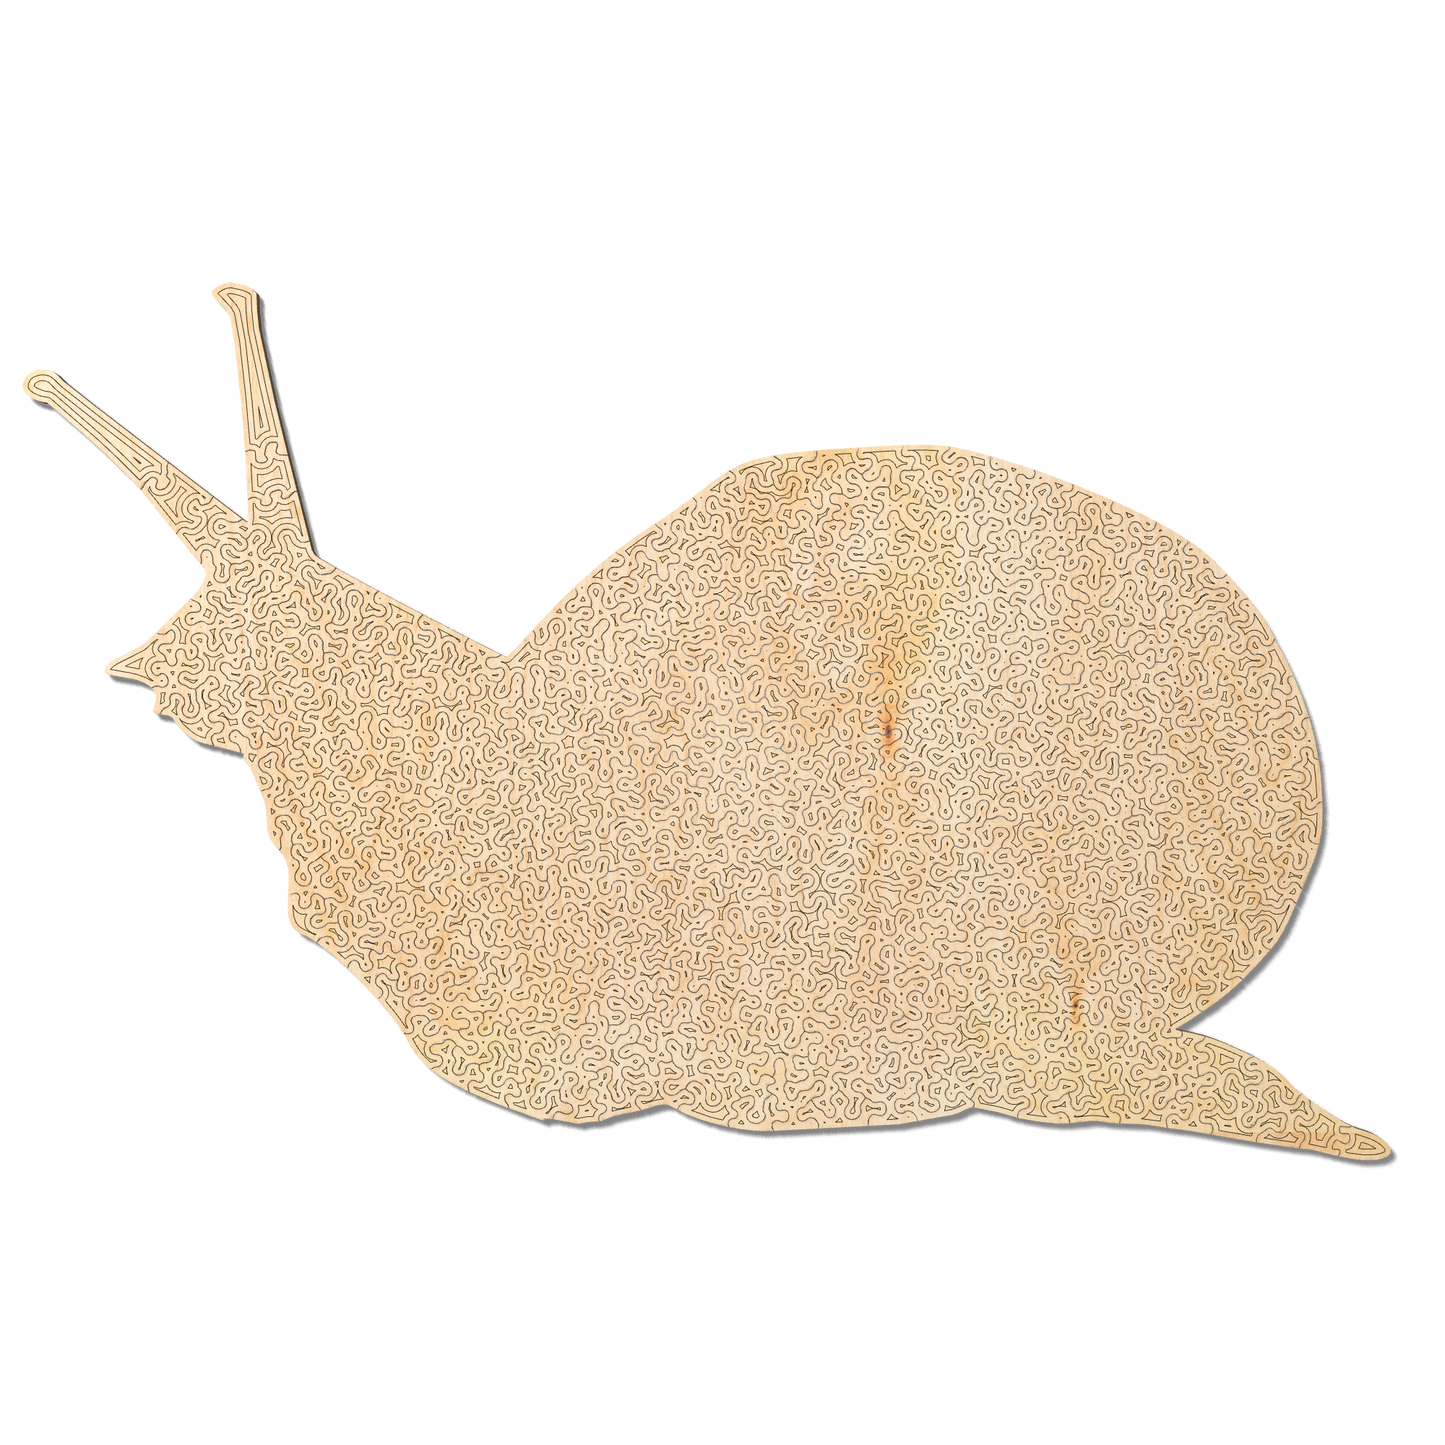 Snail | Wooden Puzzle | Chaos series - 300 pieces